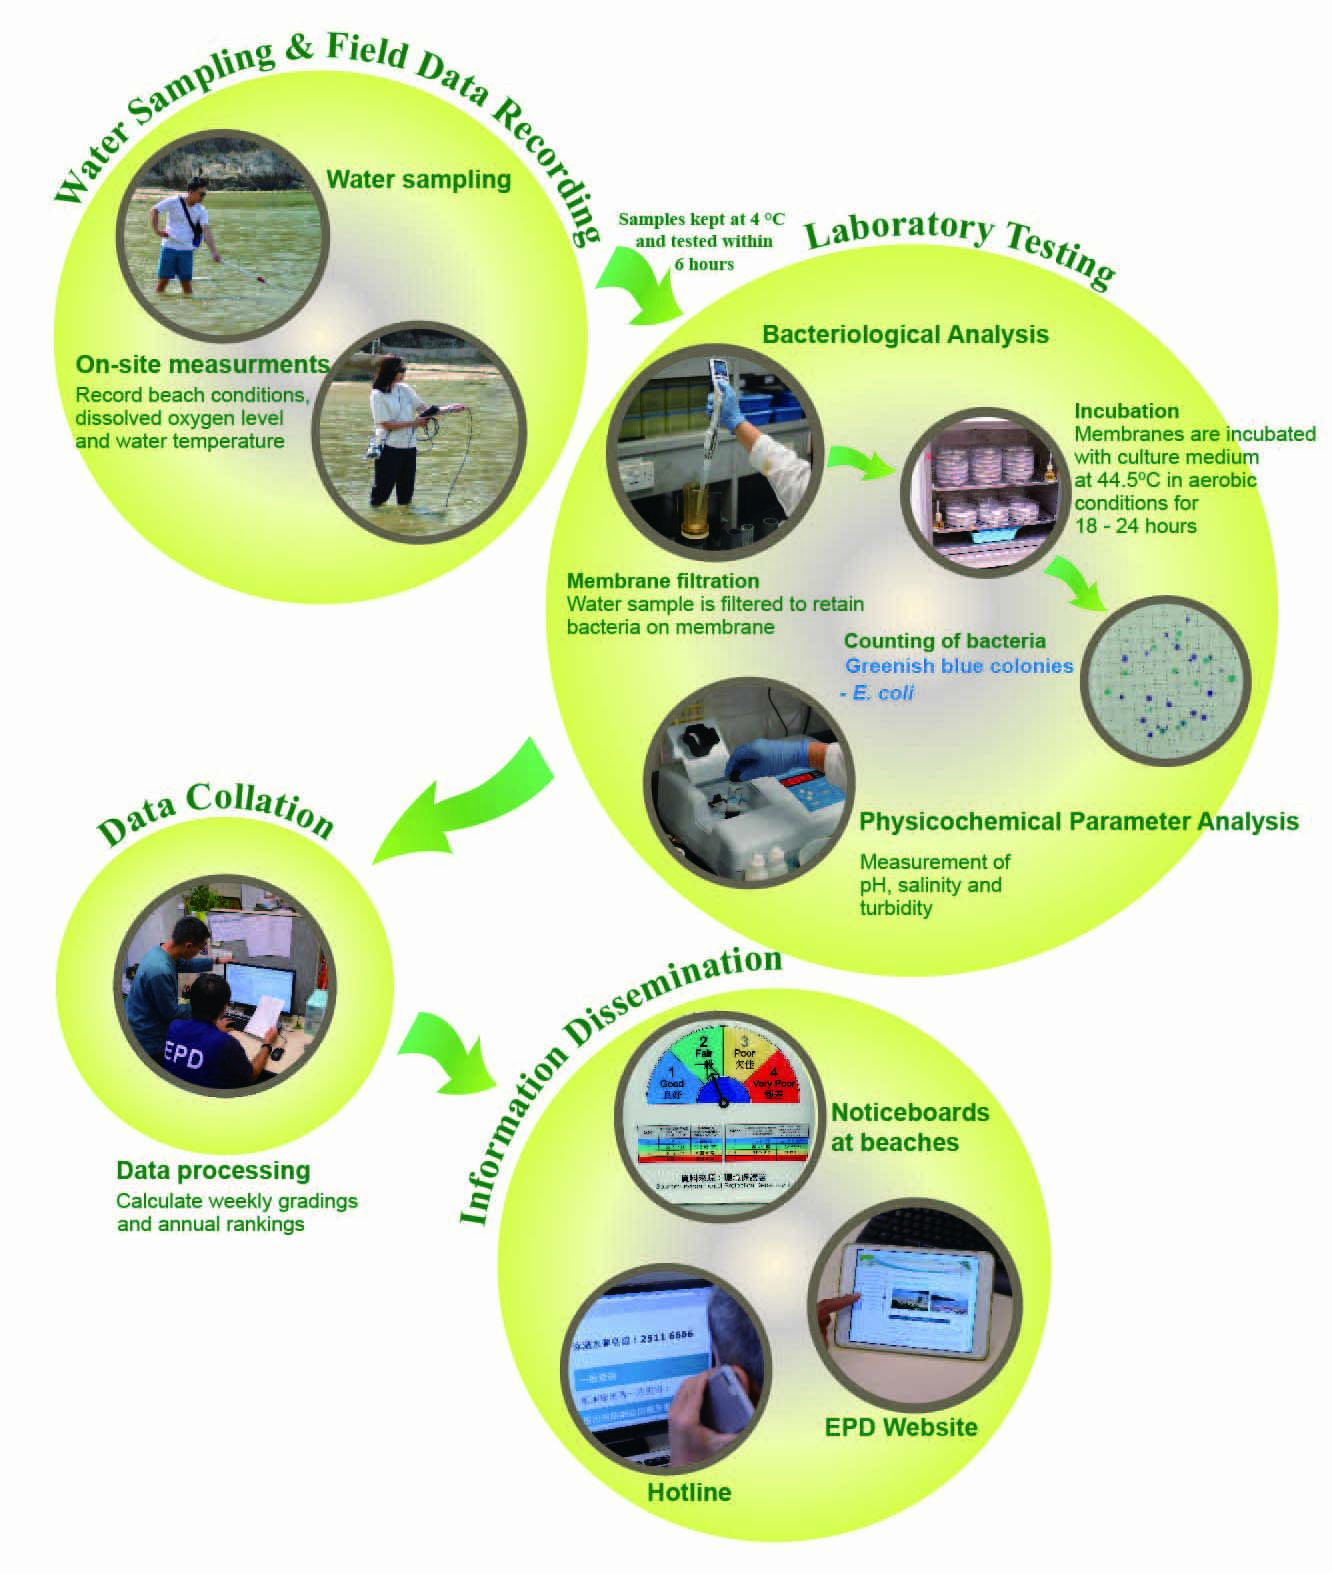 Overview of various stages of the Beach Monitoring Programme